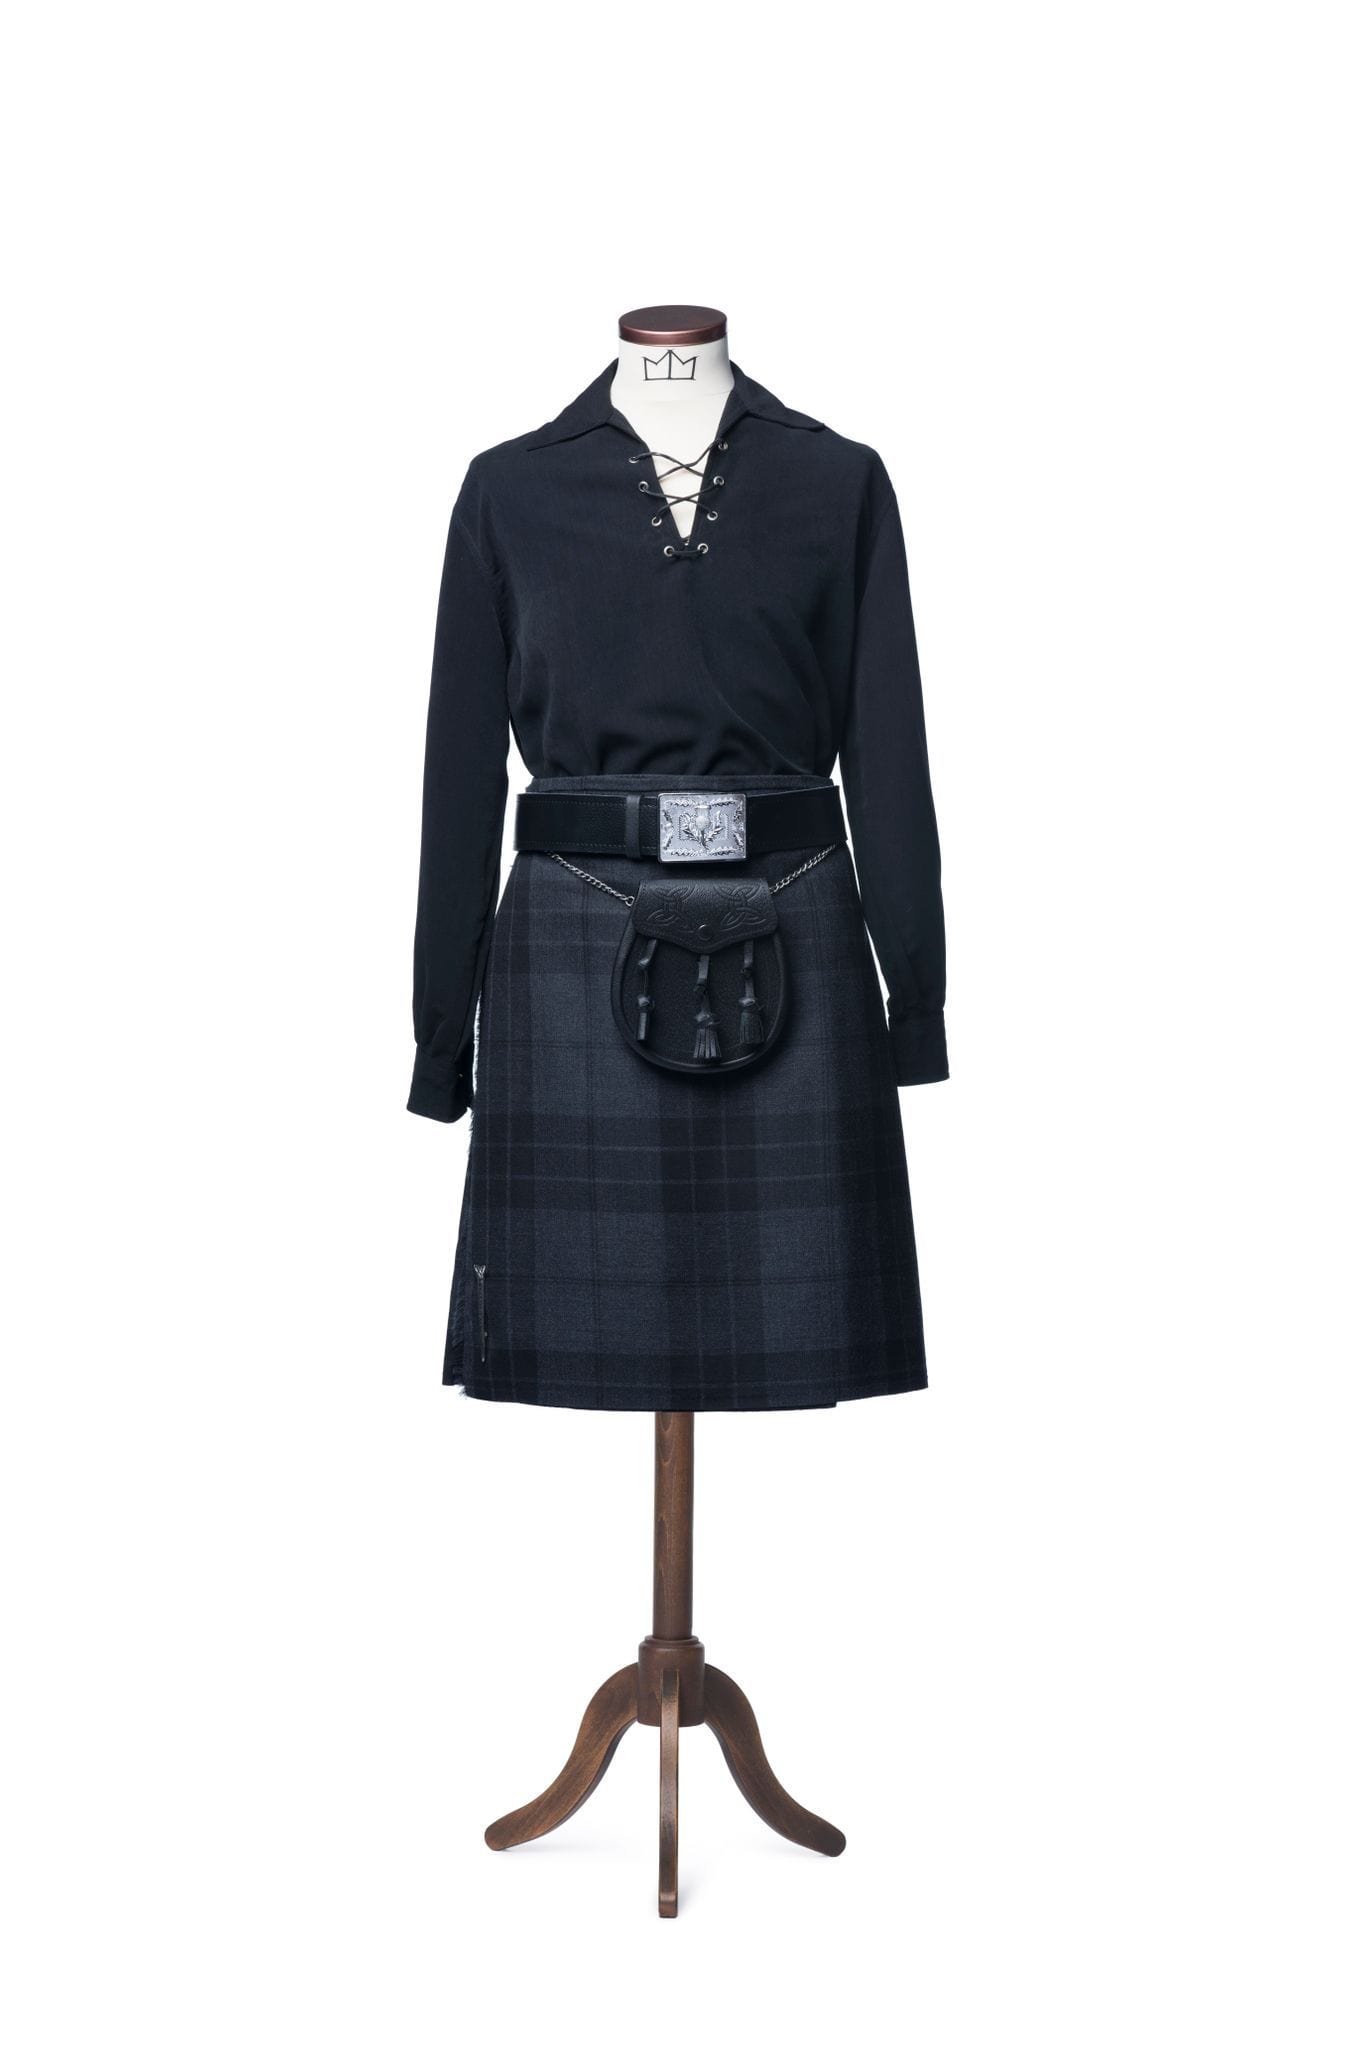 Ghillie Kilt Outfit - MacGregor and MacDuff